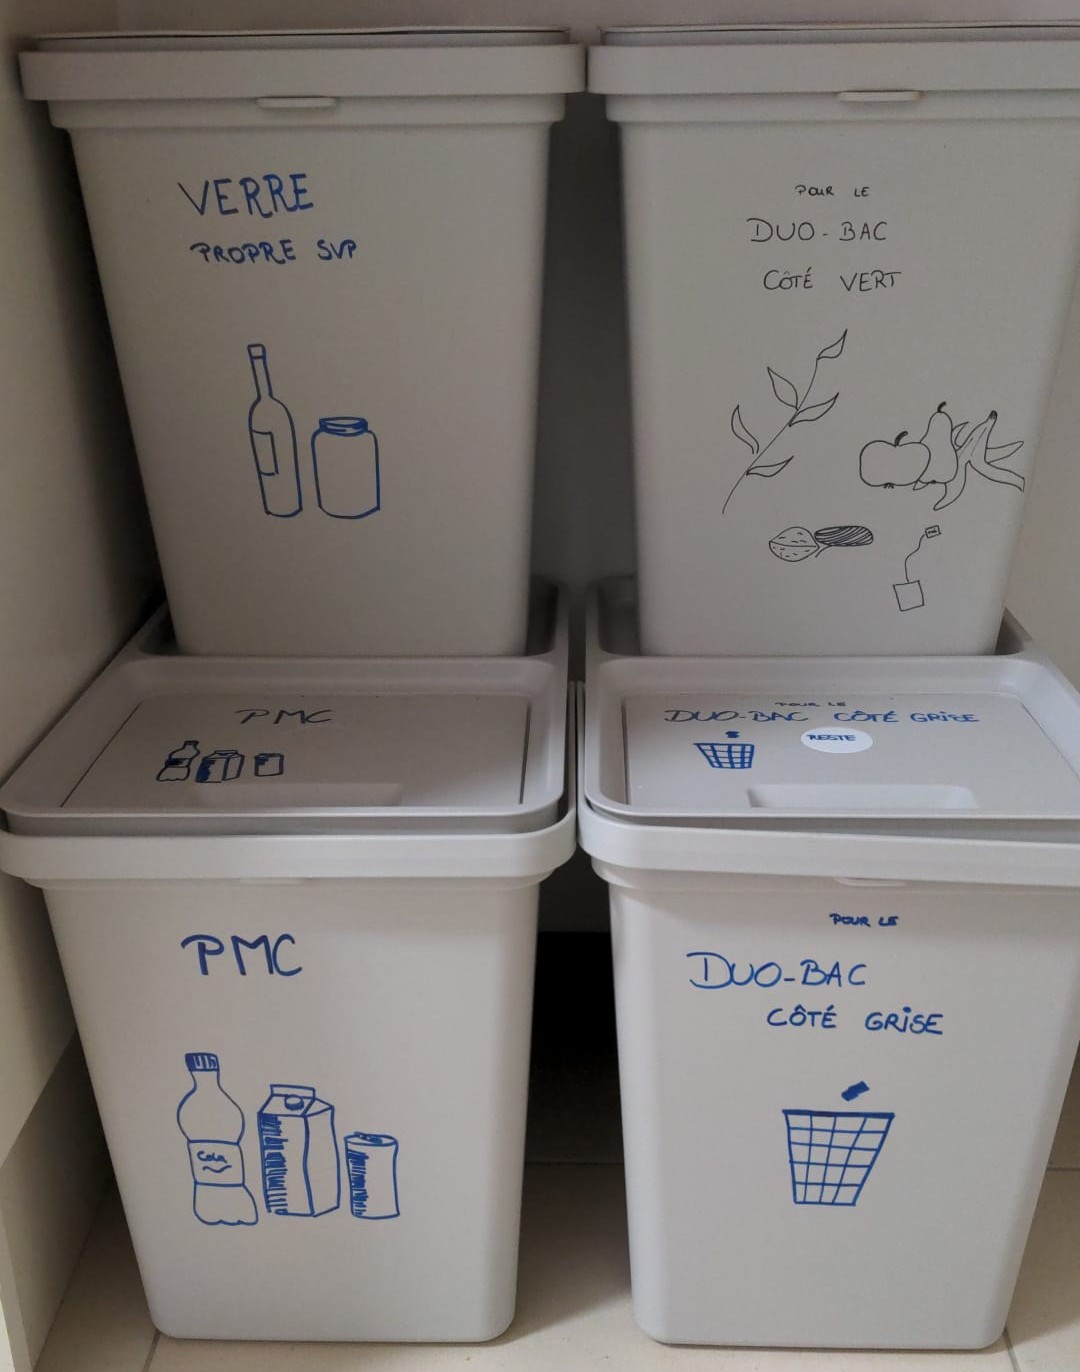 How to explain the recycling system to my guests - Tools - Airbnb hosts  forum